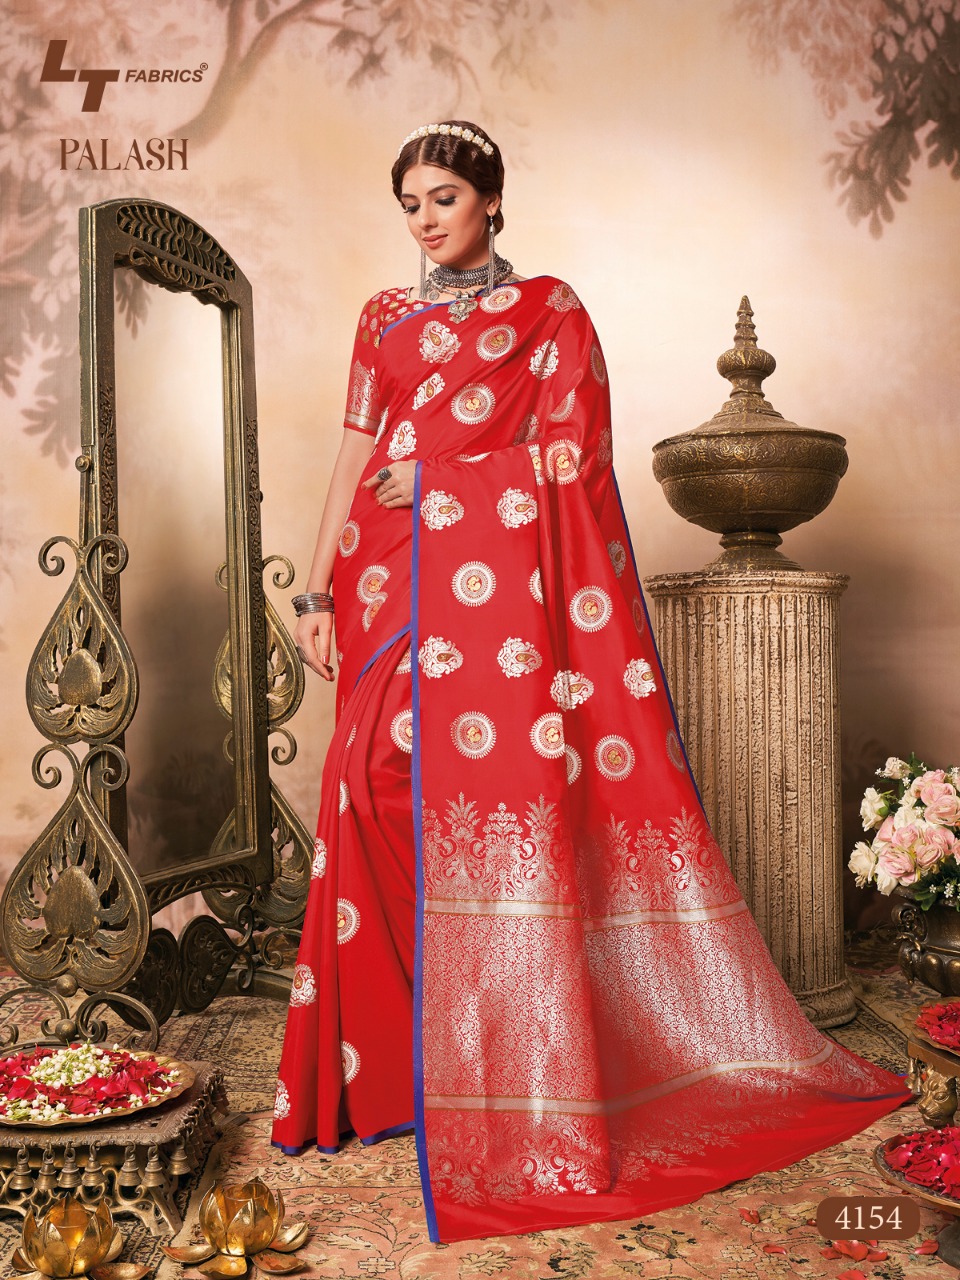 LT fashion palash simplicity in new and stylish look sarees in wholesale prices